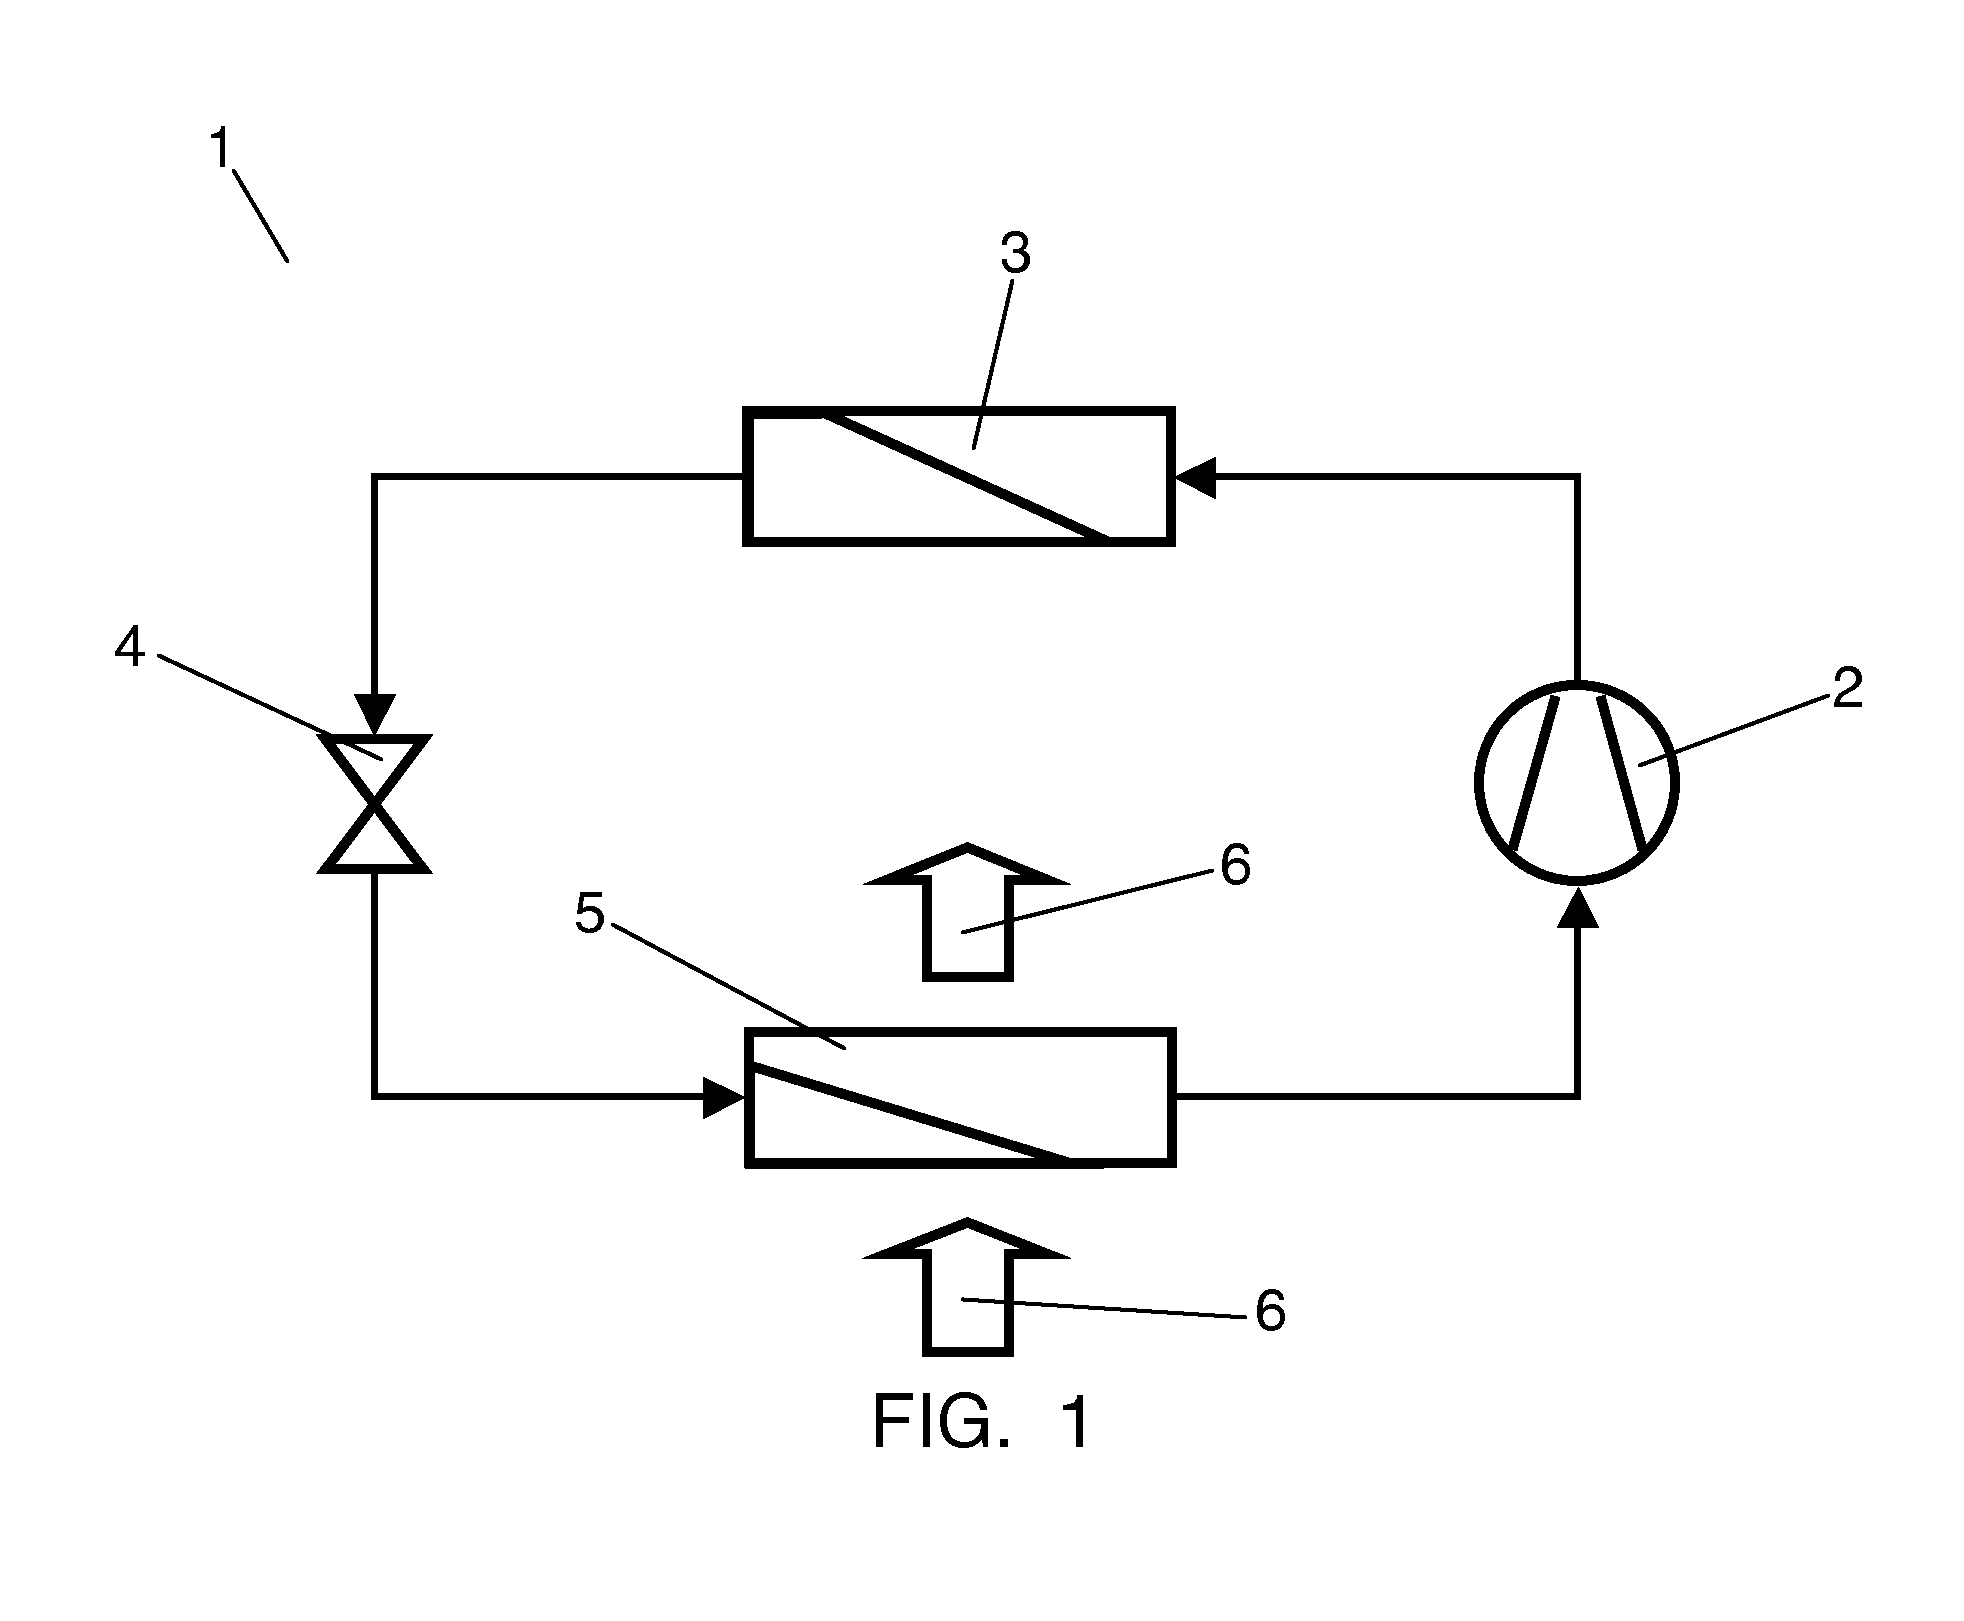 Expansion valve with variable opening degree